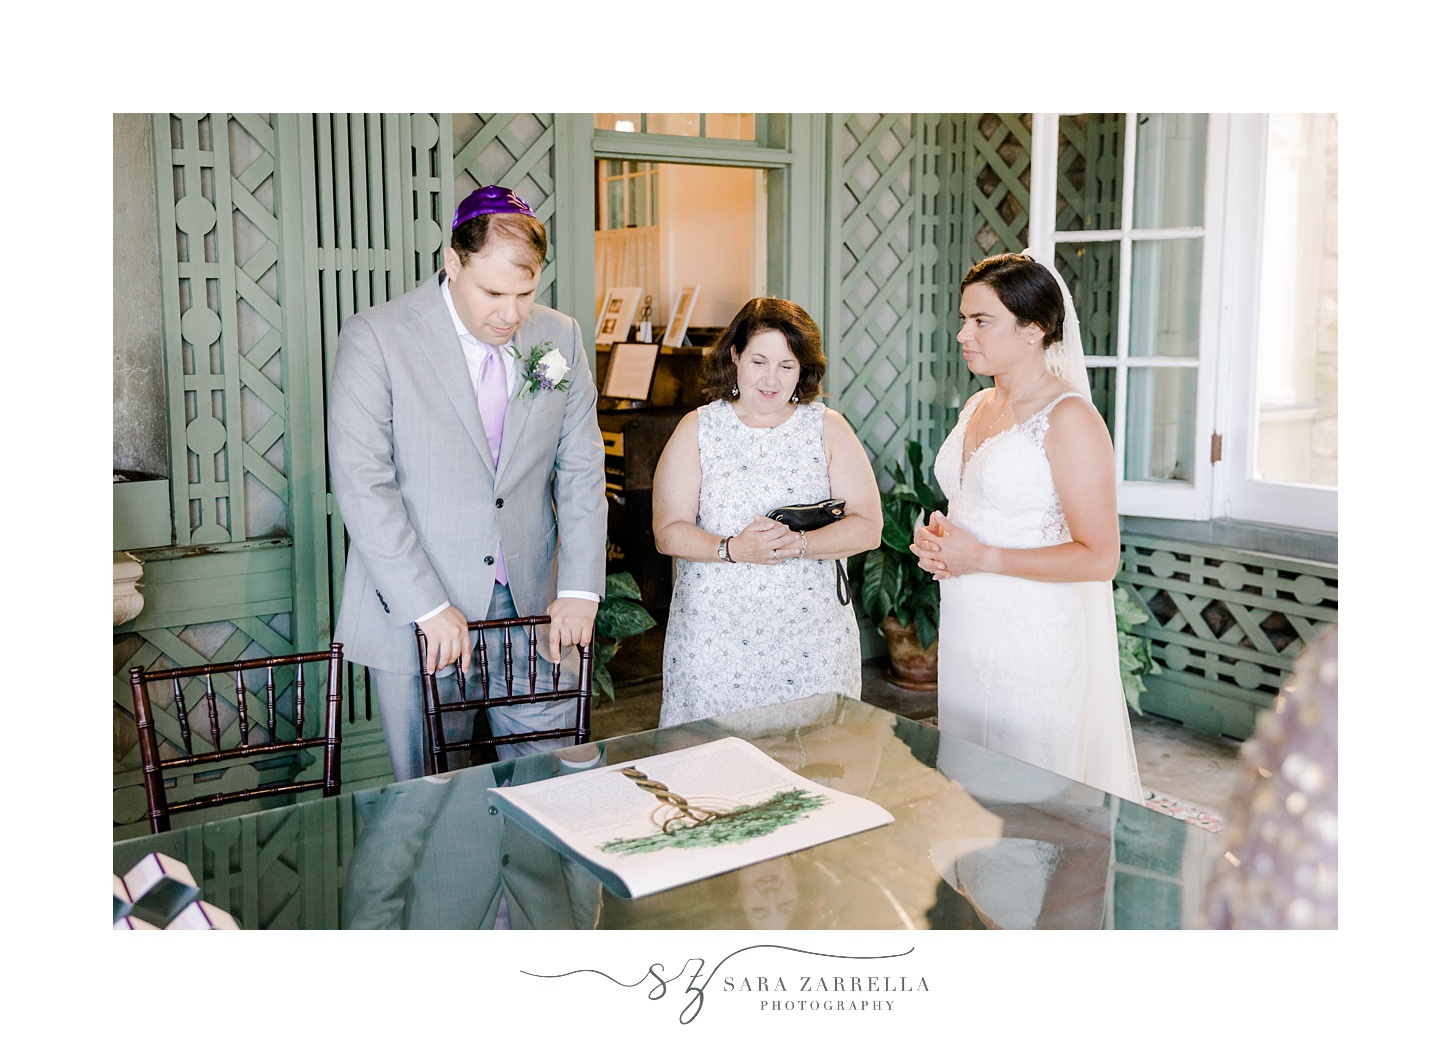 bride and groom prepare to sign their Ketubah